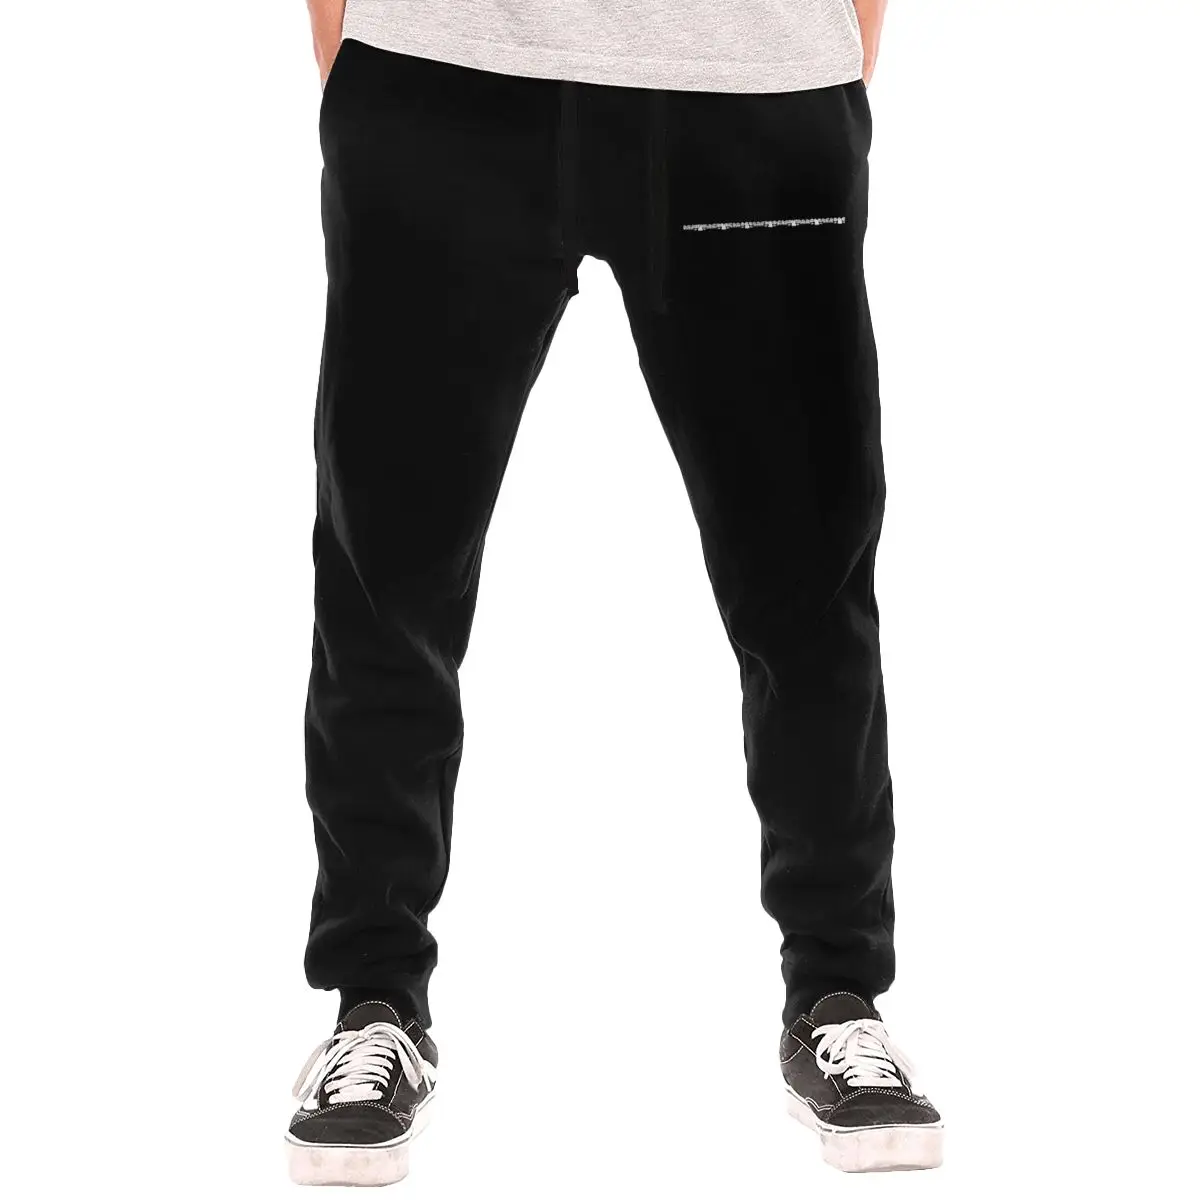 

Autumn winter men's sweatpants small print pattern comfortable and warm, suitable for casual outing